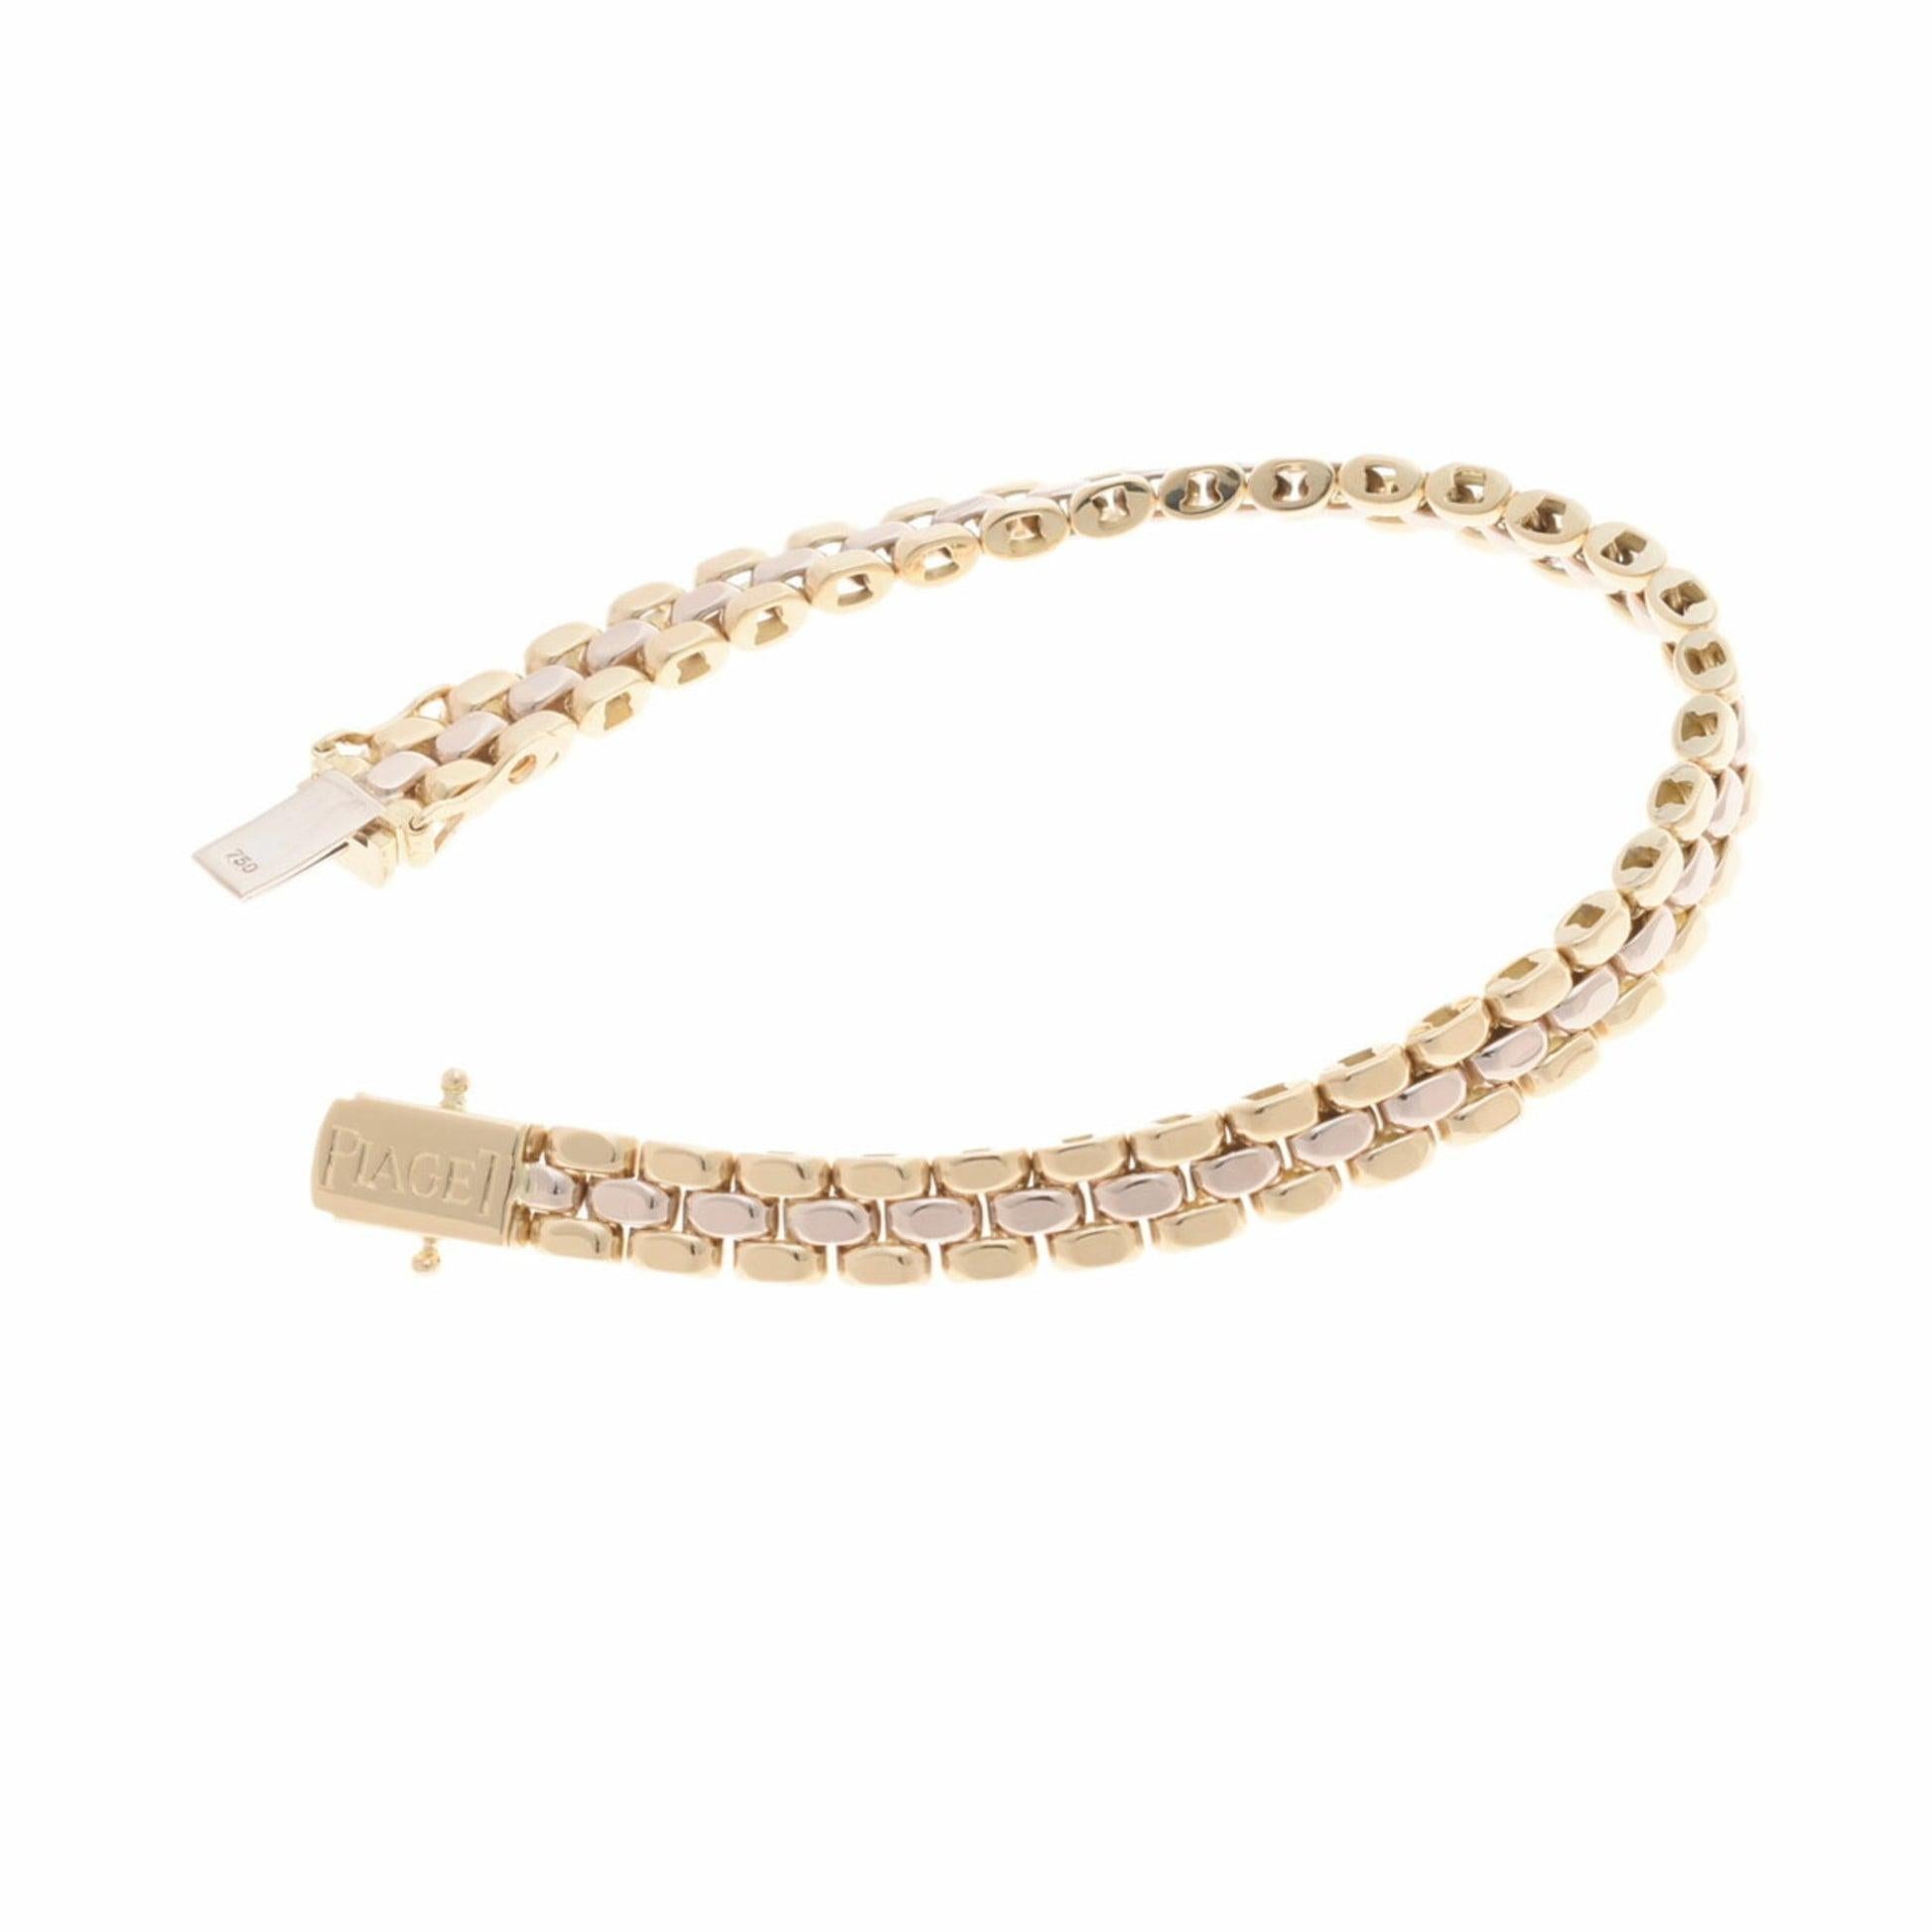 Piaget Bracelet in 18K Yellow Gold and White Gold For Sale 2